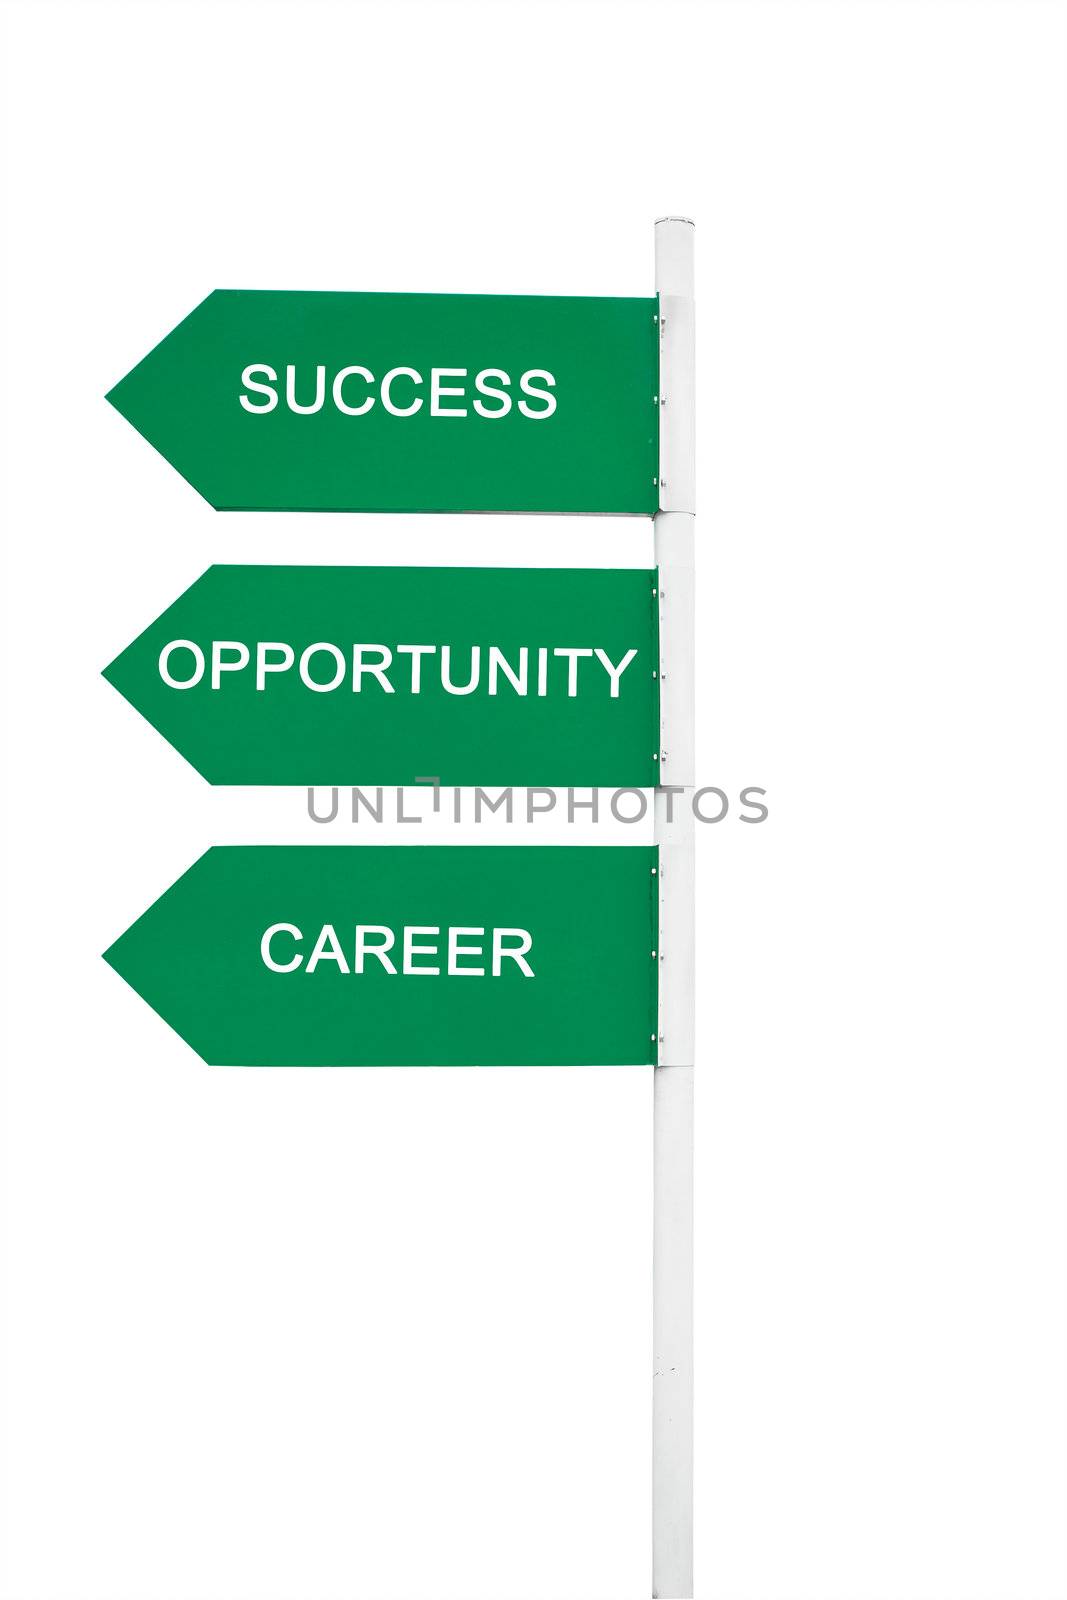 Success concept related words in sign